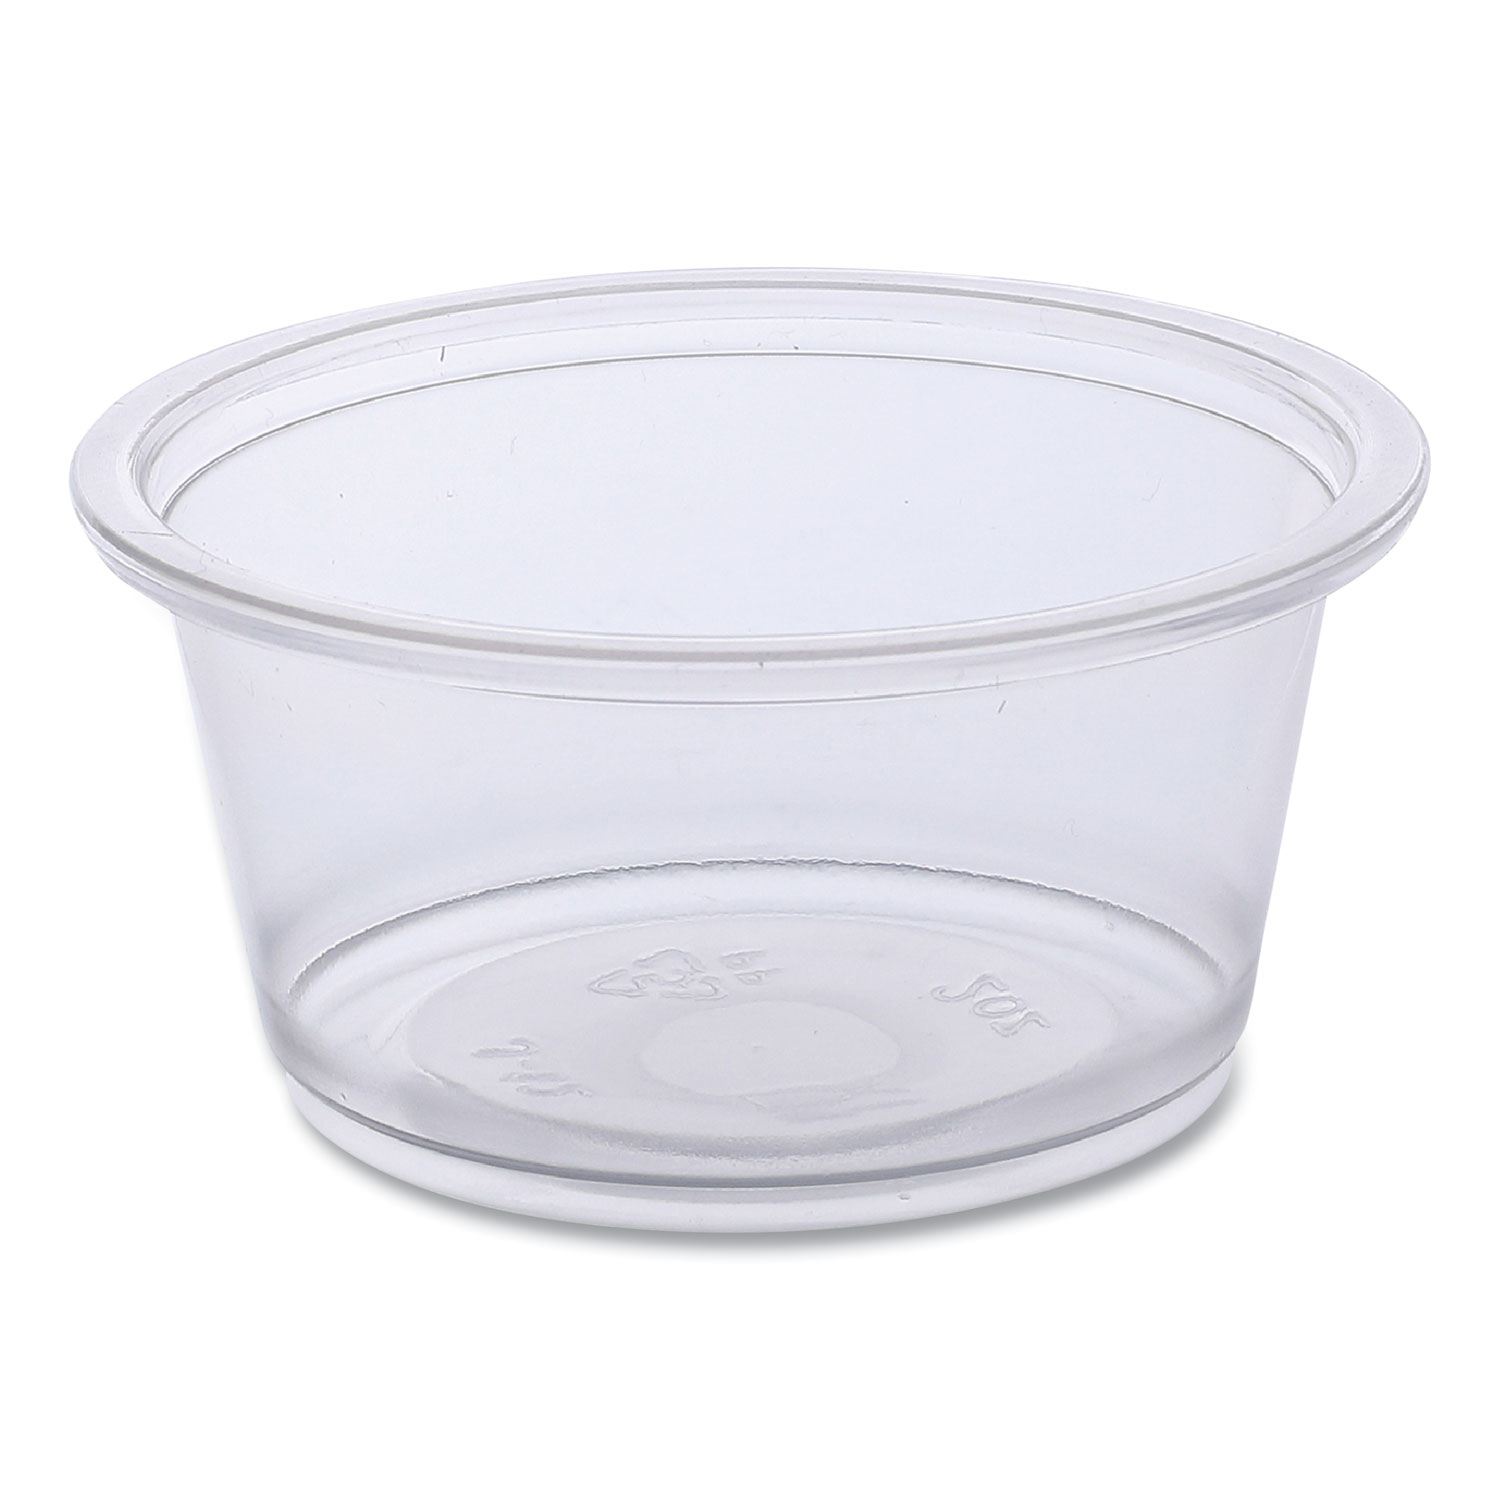 Choice 3.25 oz. Clear Plastic Souffle Cup / Portion Cup - 100/Pack